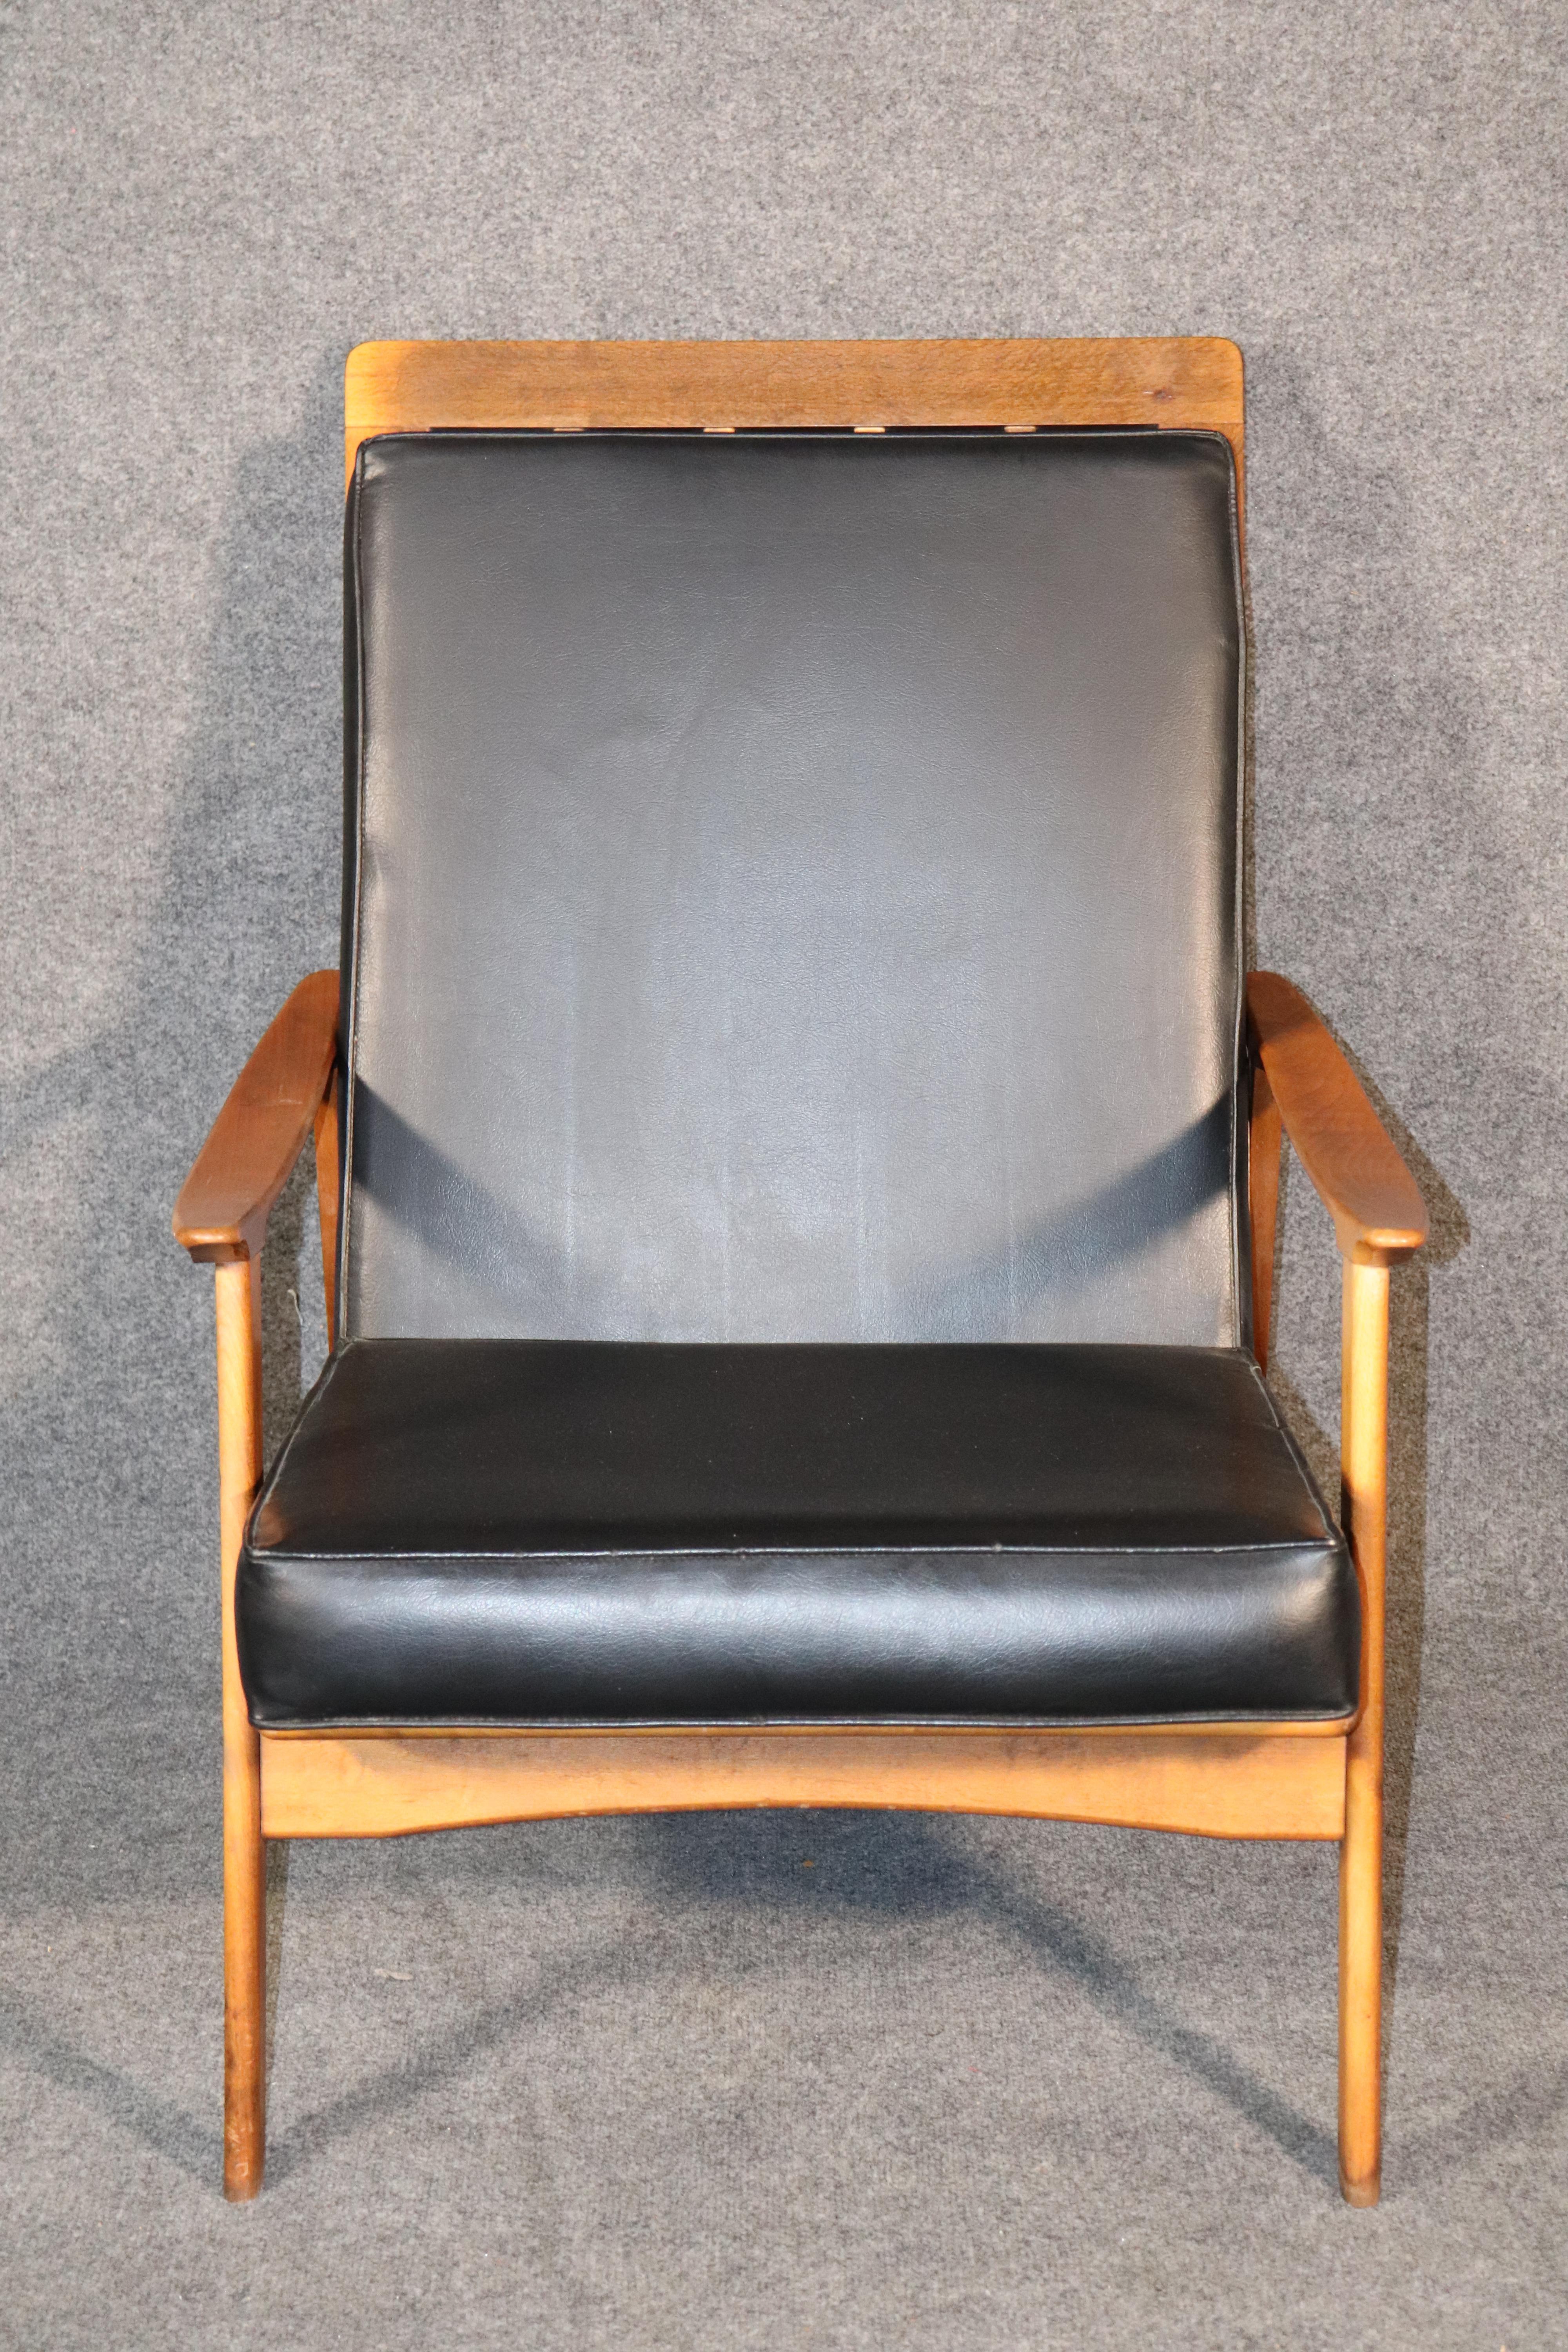 Vintage modern armchair with high back. Two cushions sit on a walnut frame lounge chair with scooping arms.
Please confirm location.